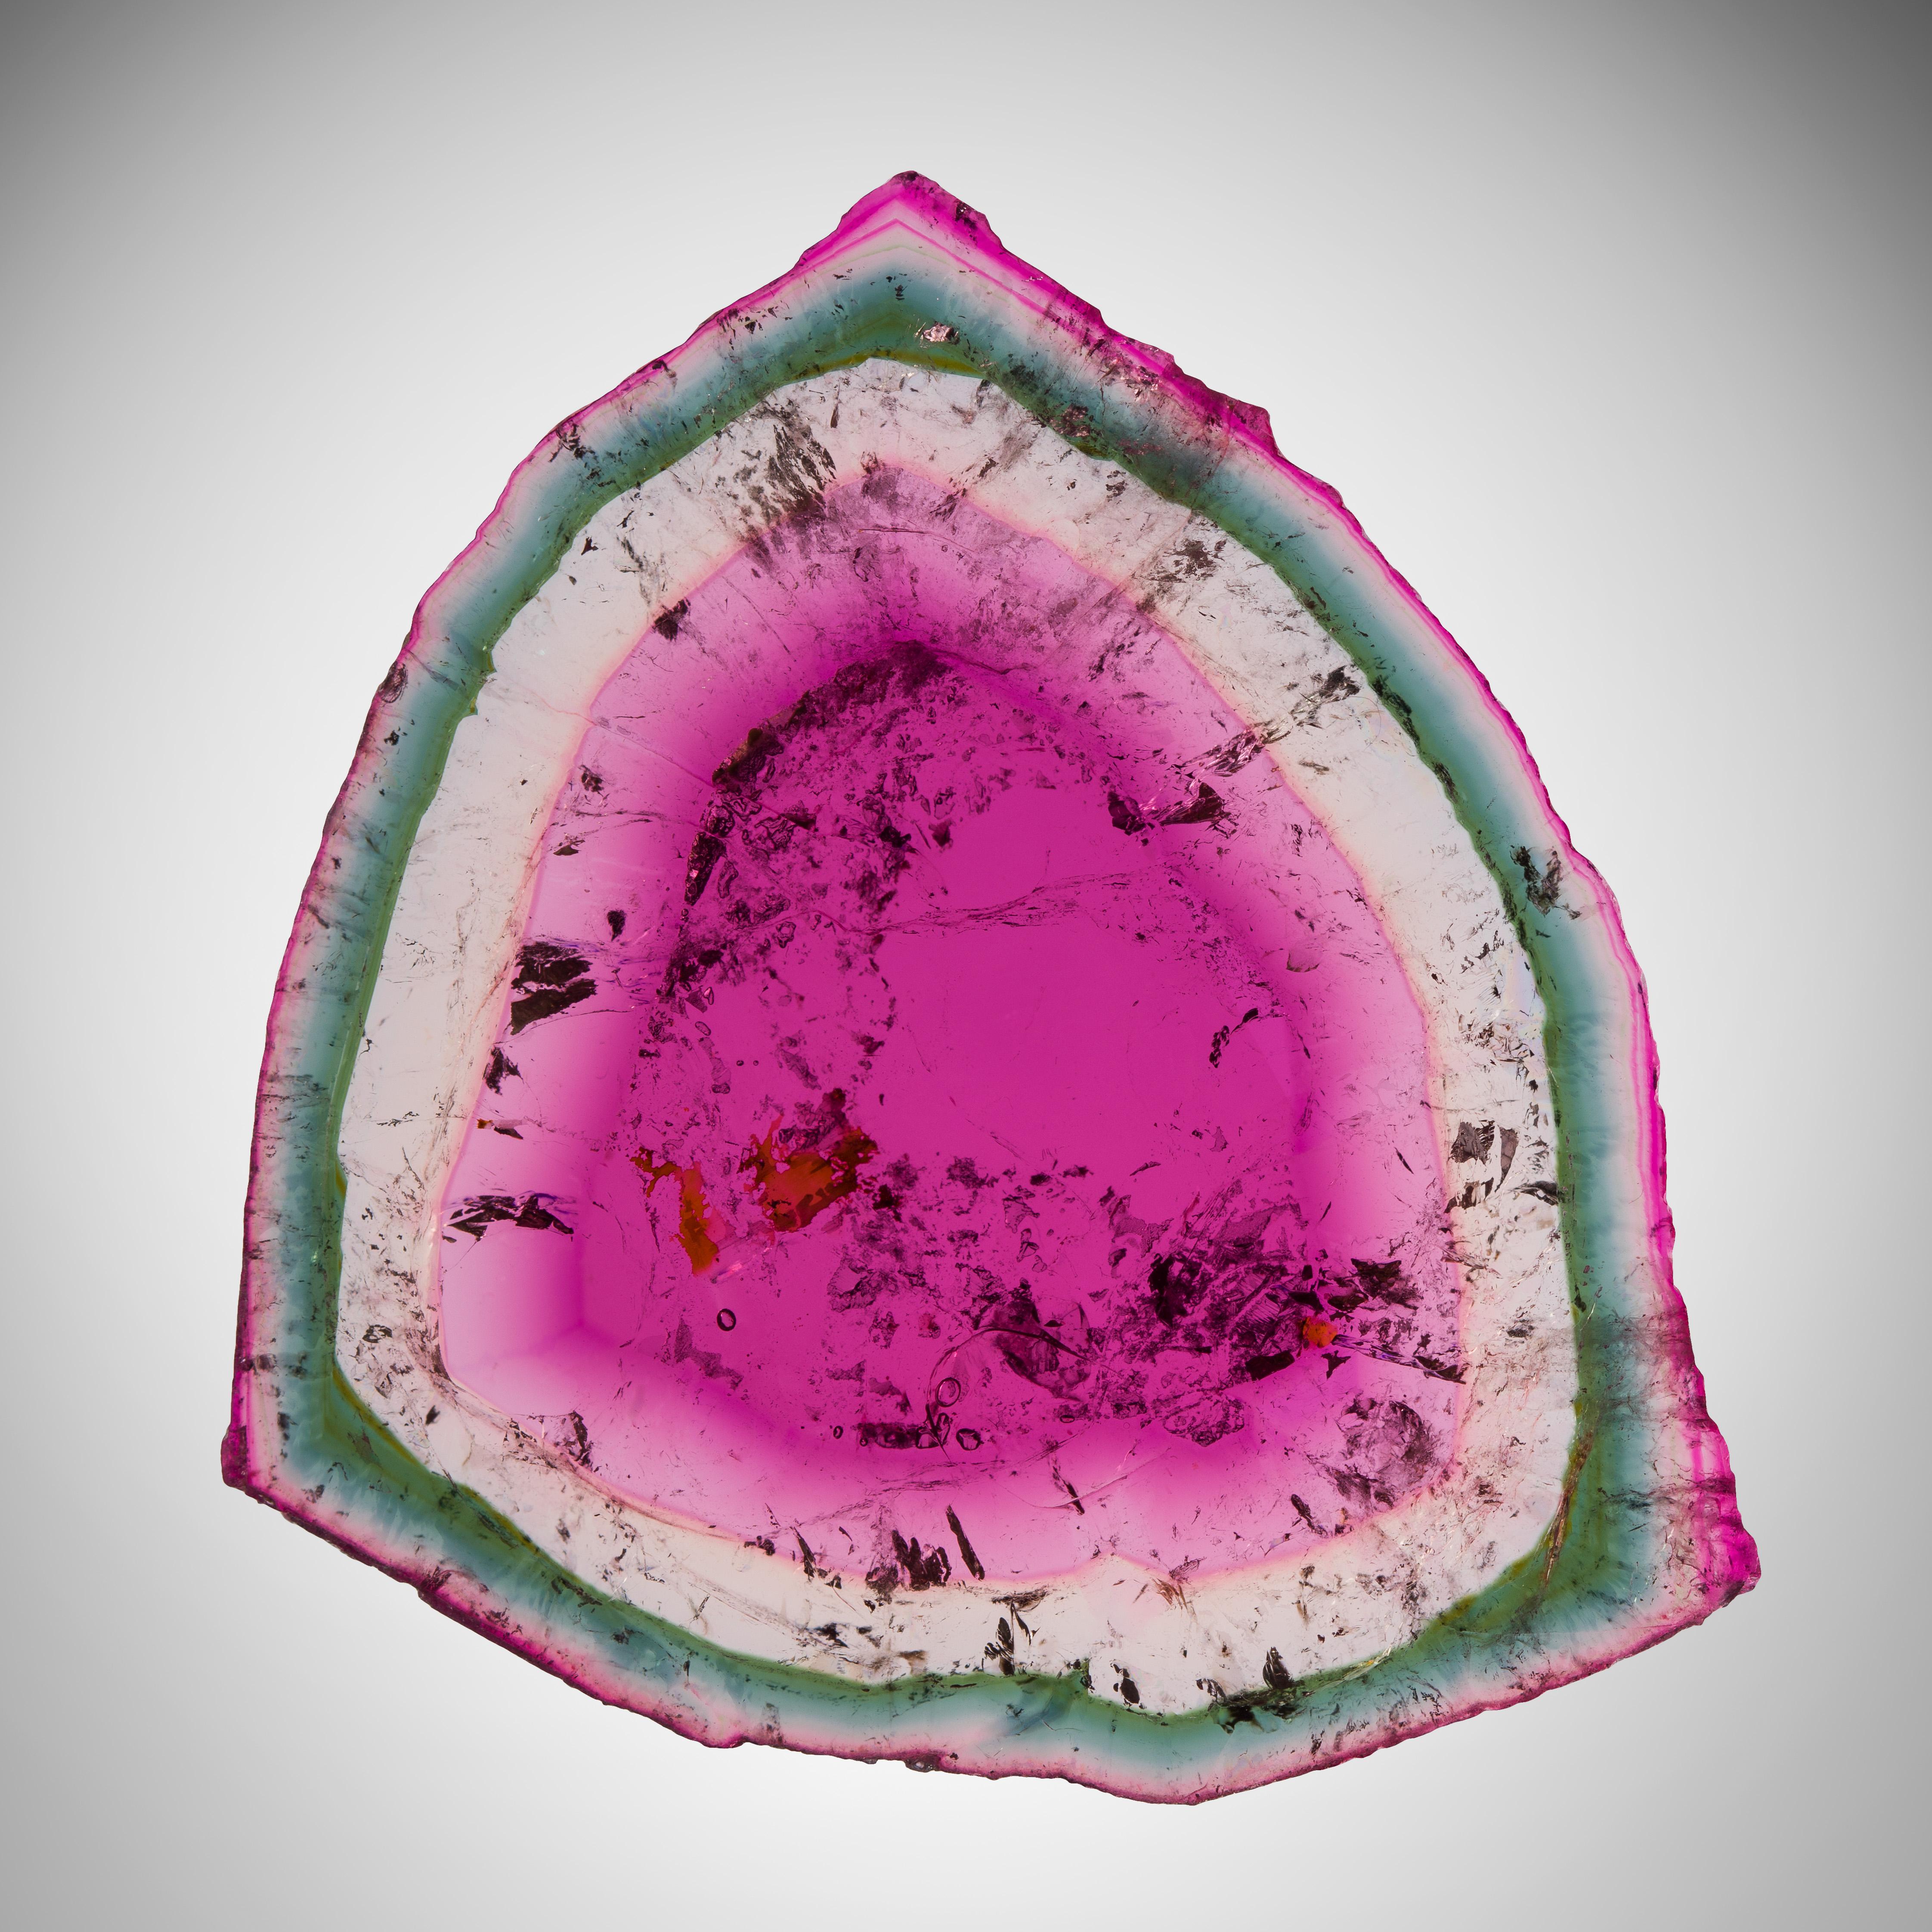 Tourmaline is loved in both the worlds of jewelry and mineral collecting for its expression of color, as well as its propensity for translucency and luster. It’s classified as a semi-precious stone and is famous not just for its intensity of tones,